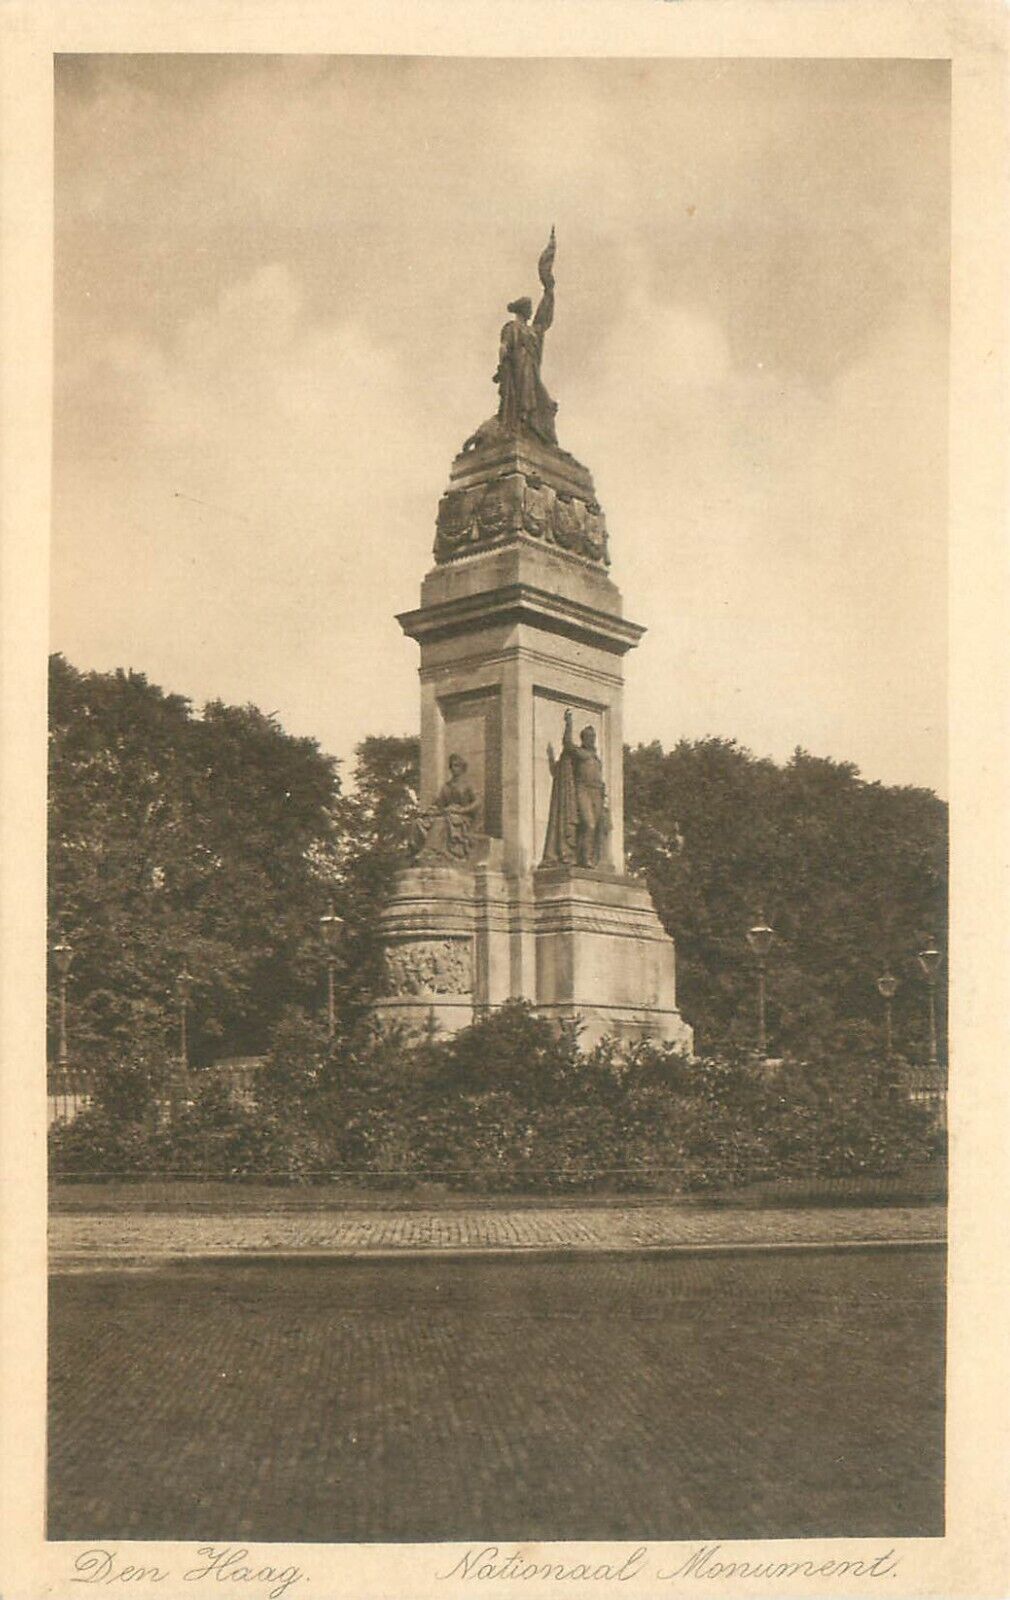 The Hague, Netherlands National Monument Sepia Postcard Unused